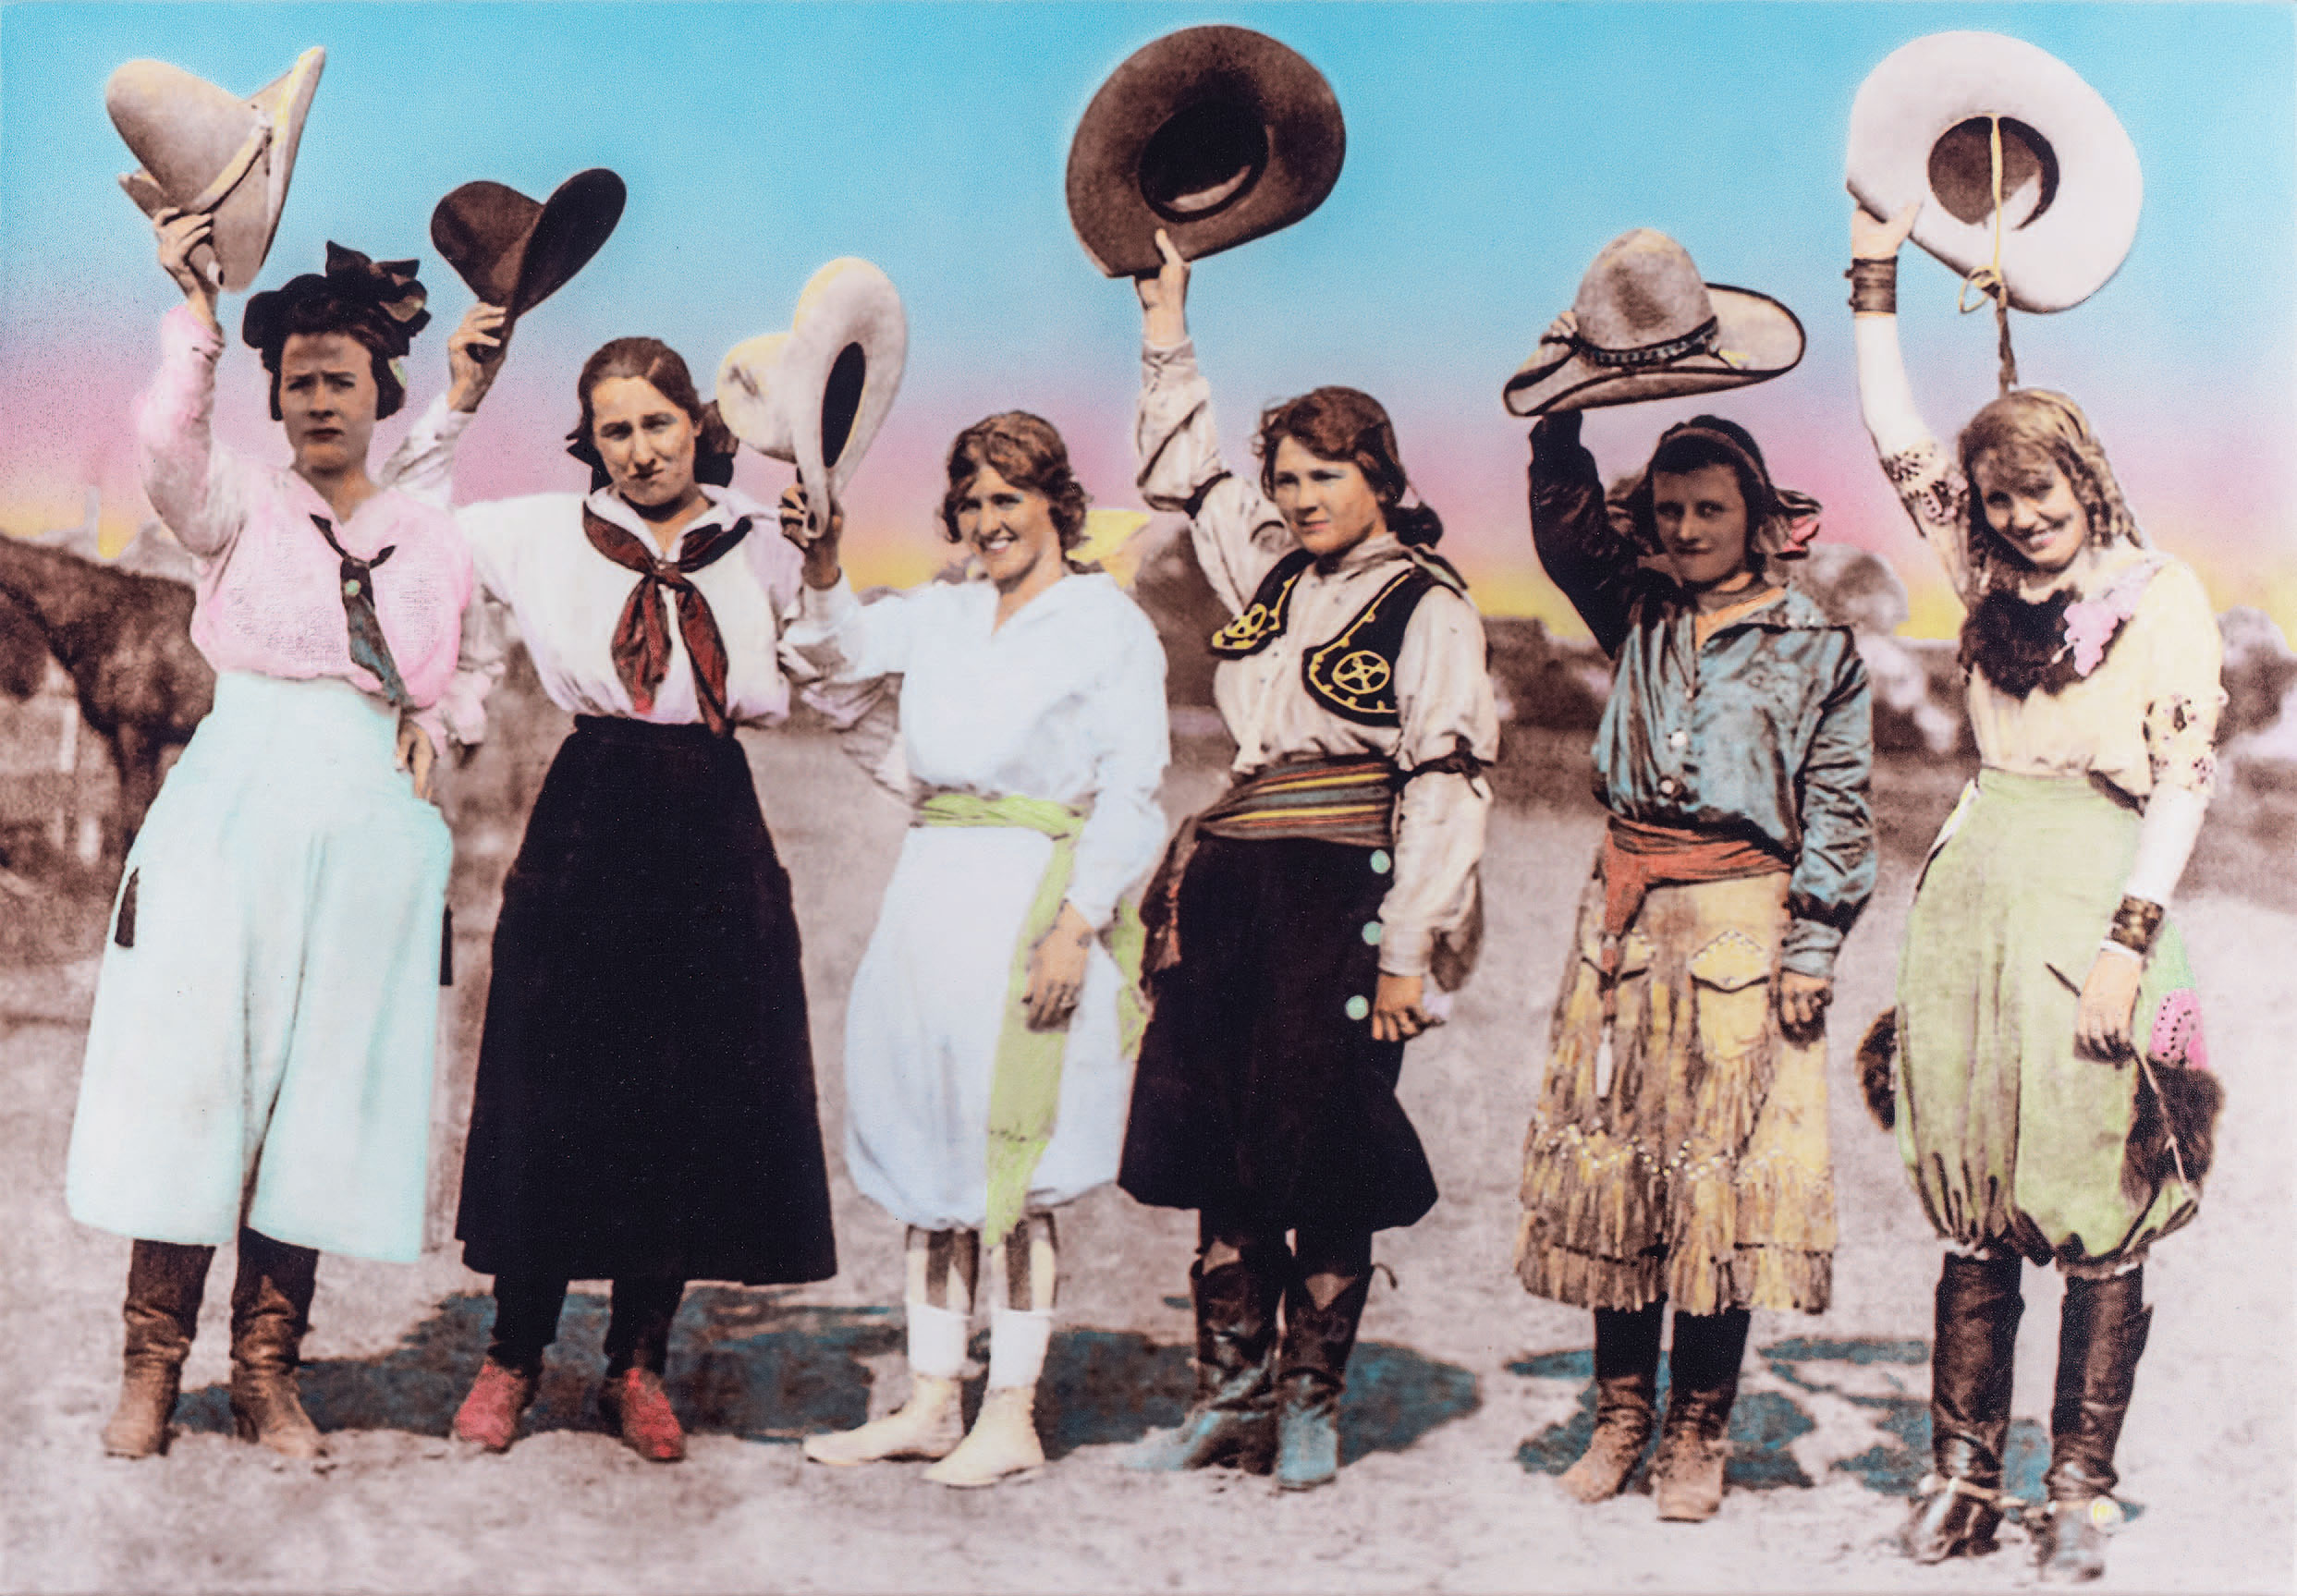 Cowgirls Salute. Photography: Courtesy 78704 Gallery and The Wittliff Collections, Albert B. Alkek Library, Texas State University, San Marcos